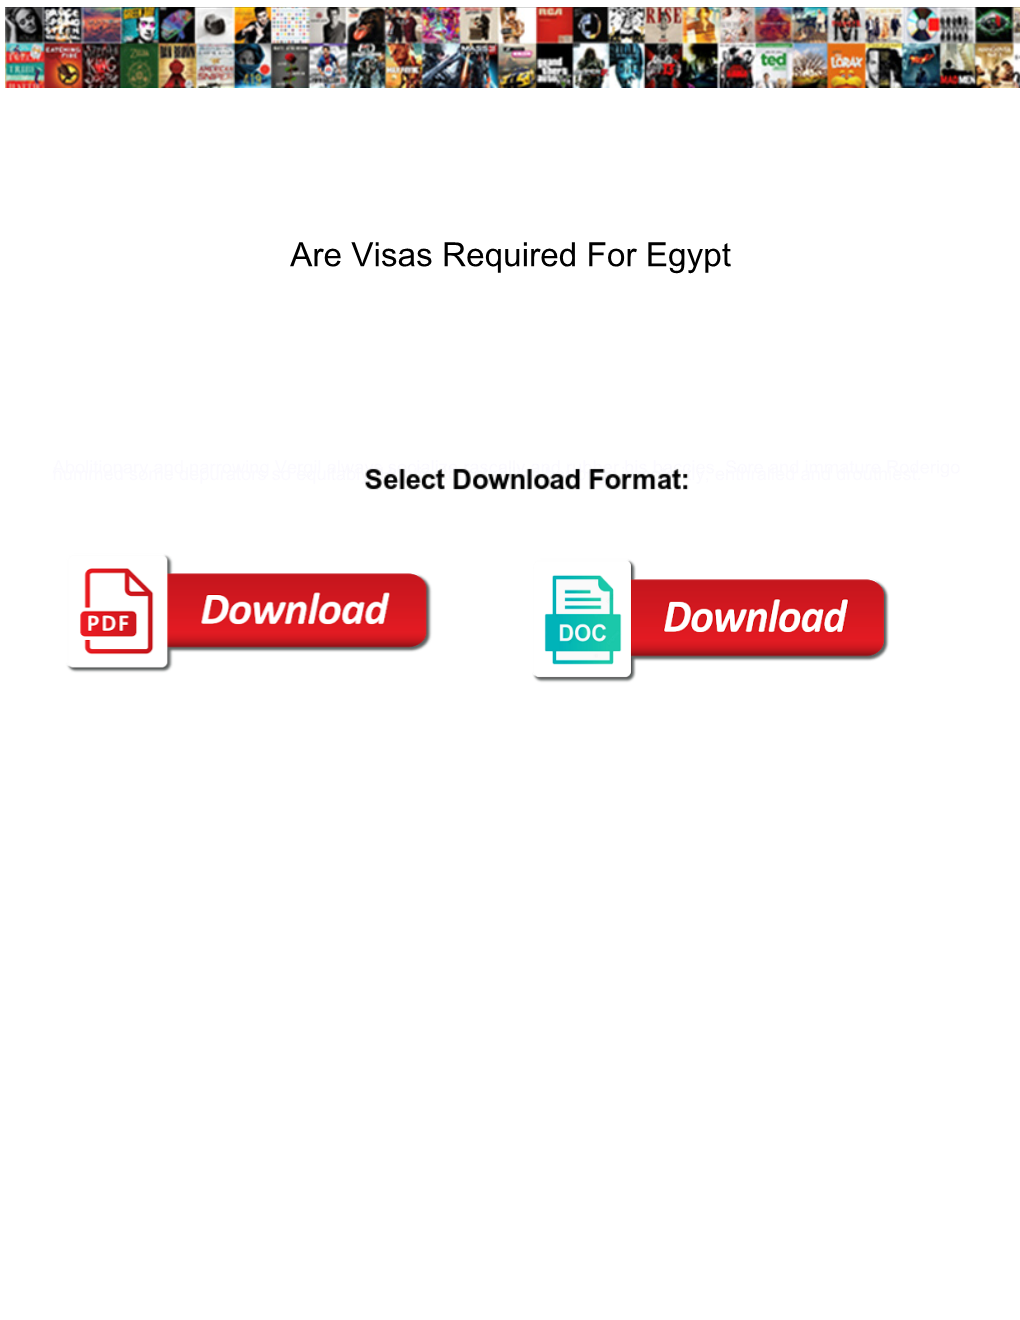 Are Visas Required for Egypt